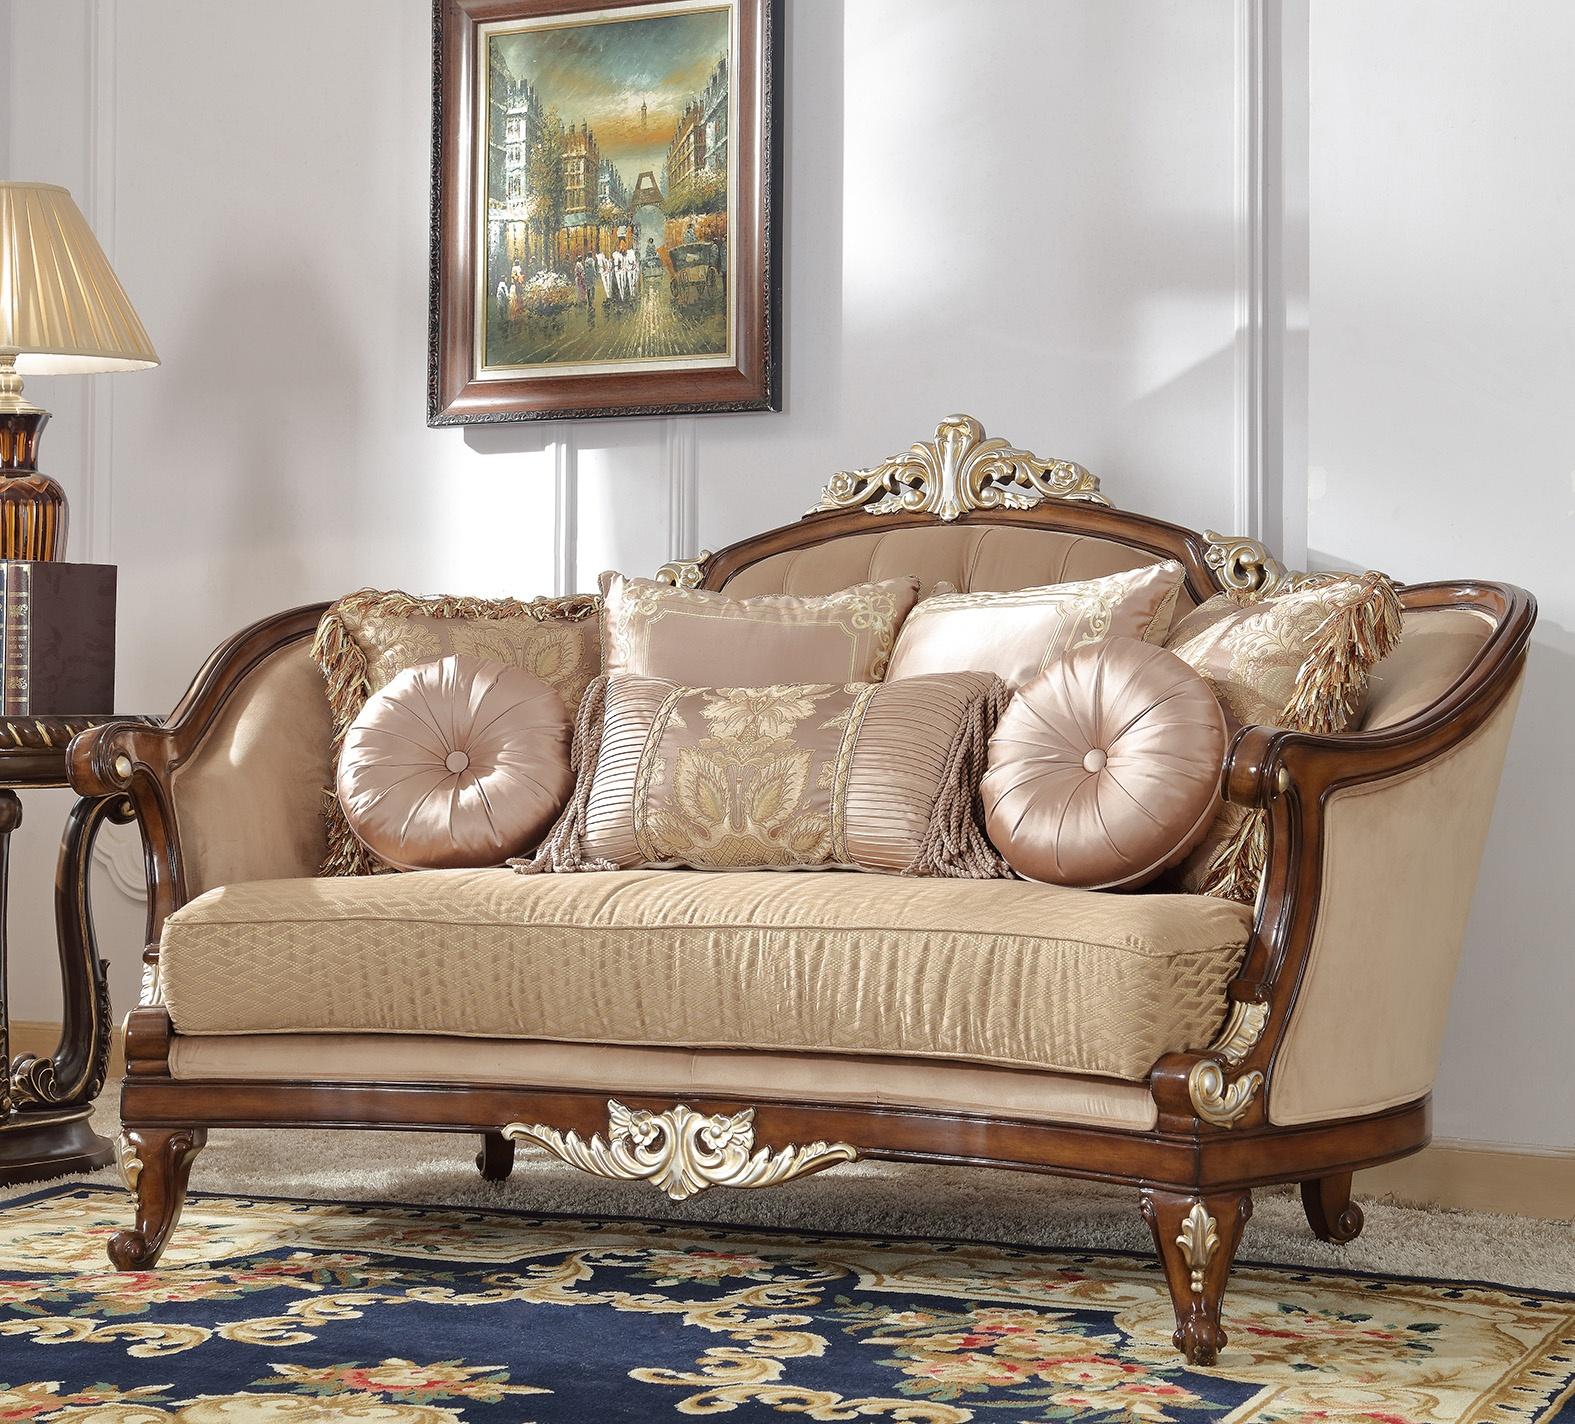 Traditional  HD-8320 HD-L8320 in Mahogany, Brown, Beige Fabric